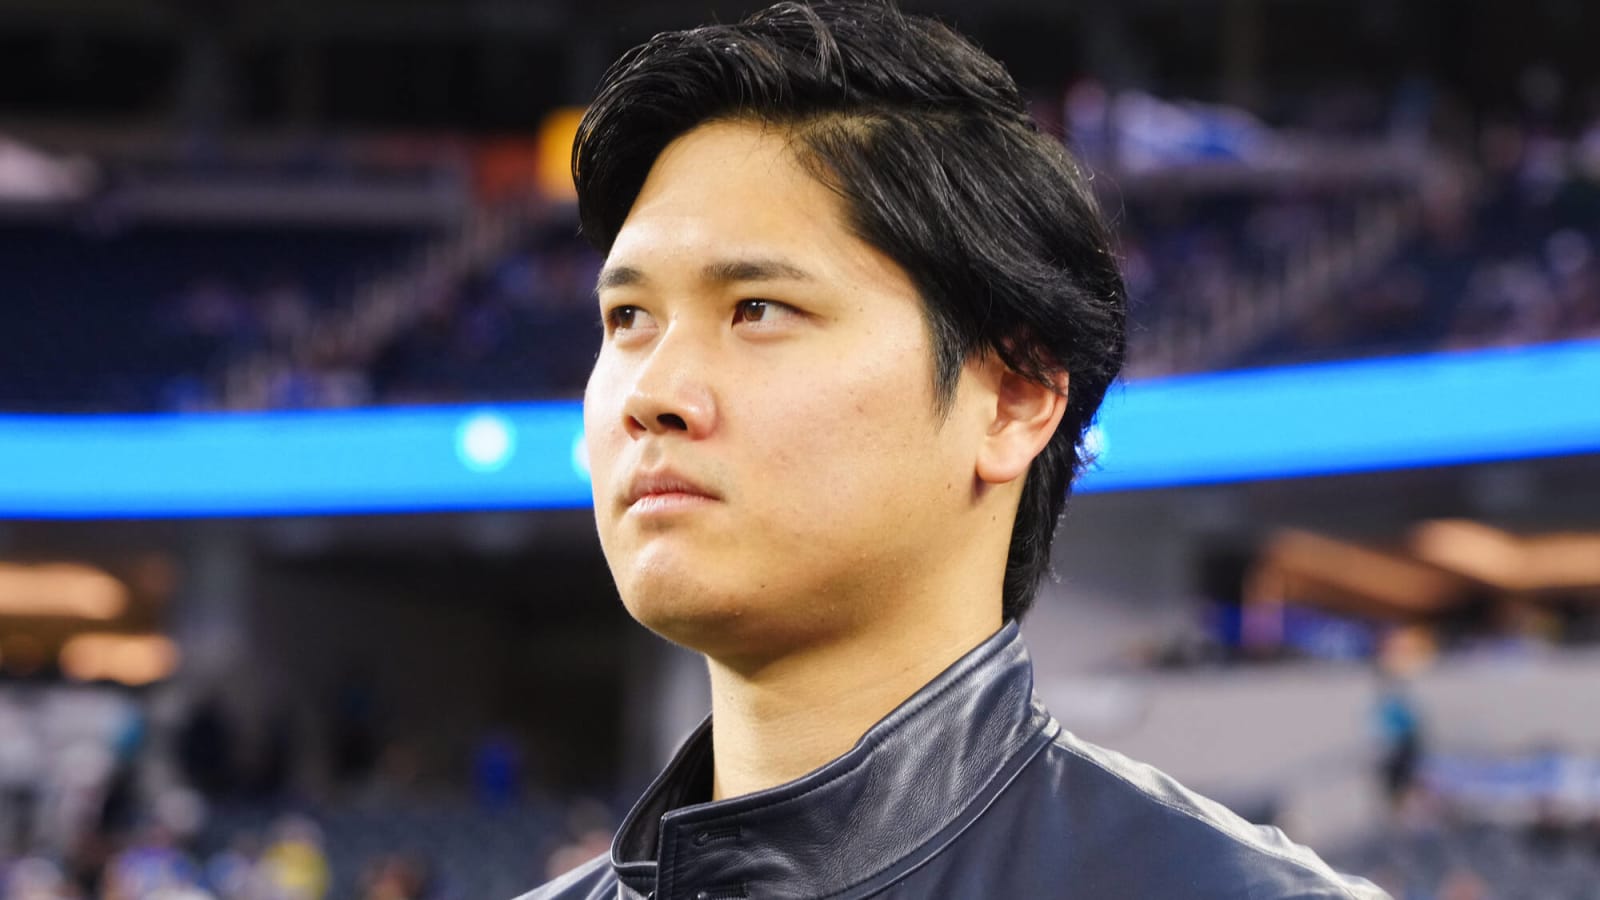 Financial Experts Believe Dodgers Will Get ‘Huge Windfall’ By Signing Shohei Ohtani